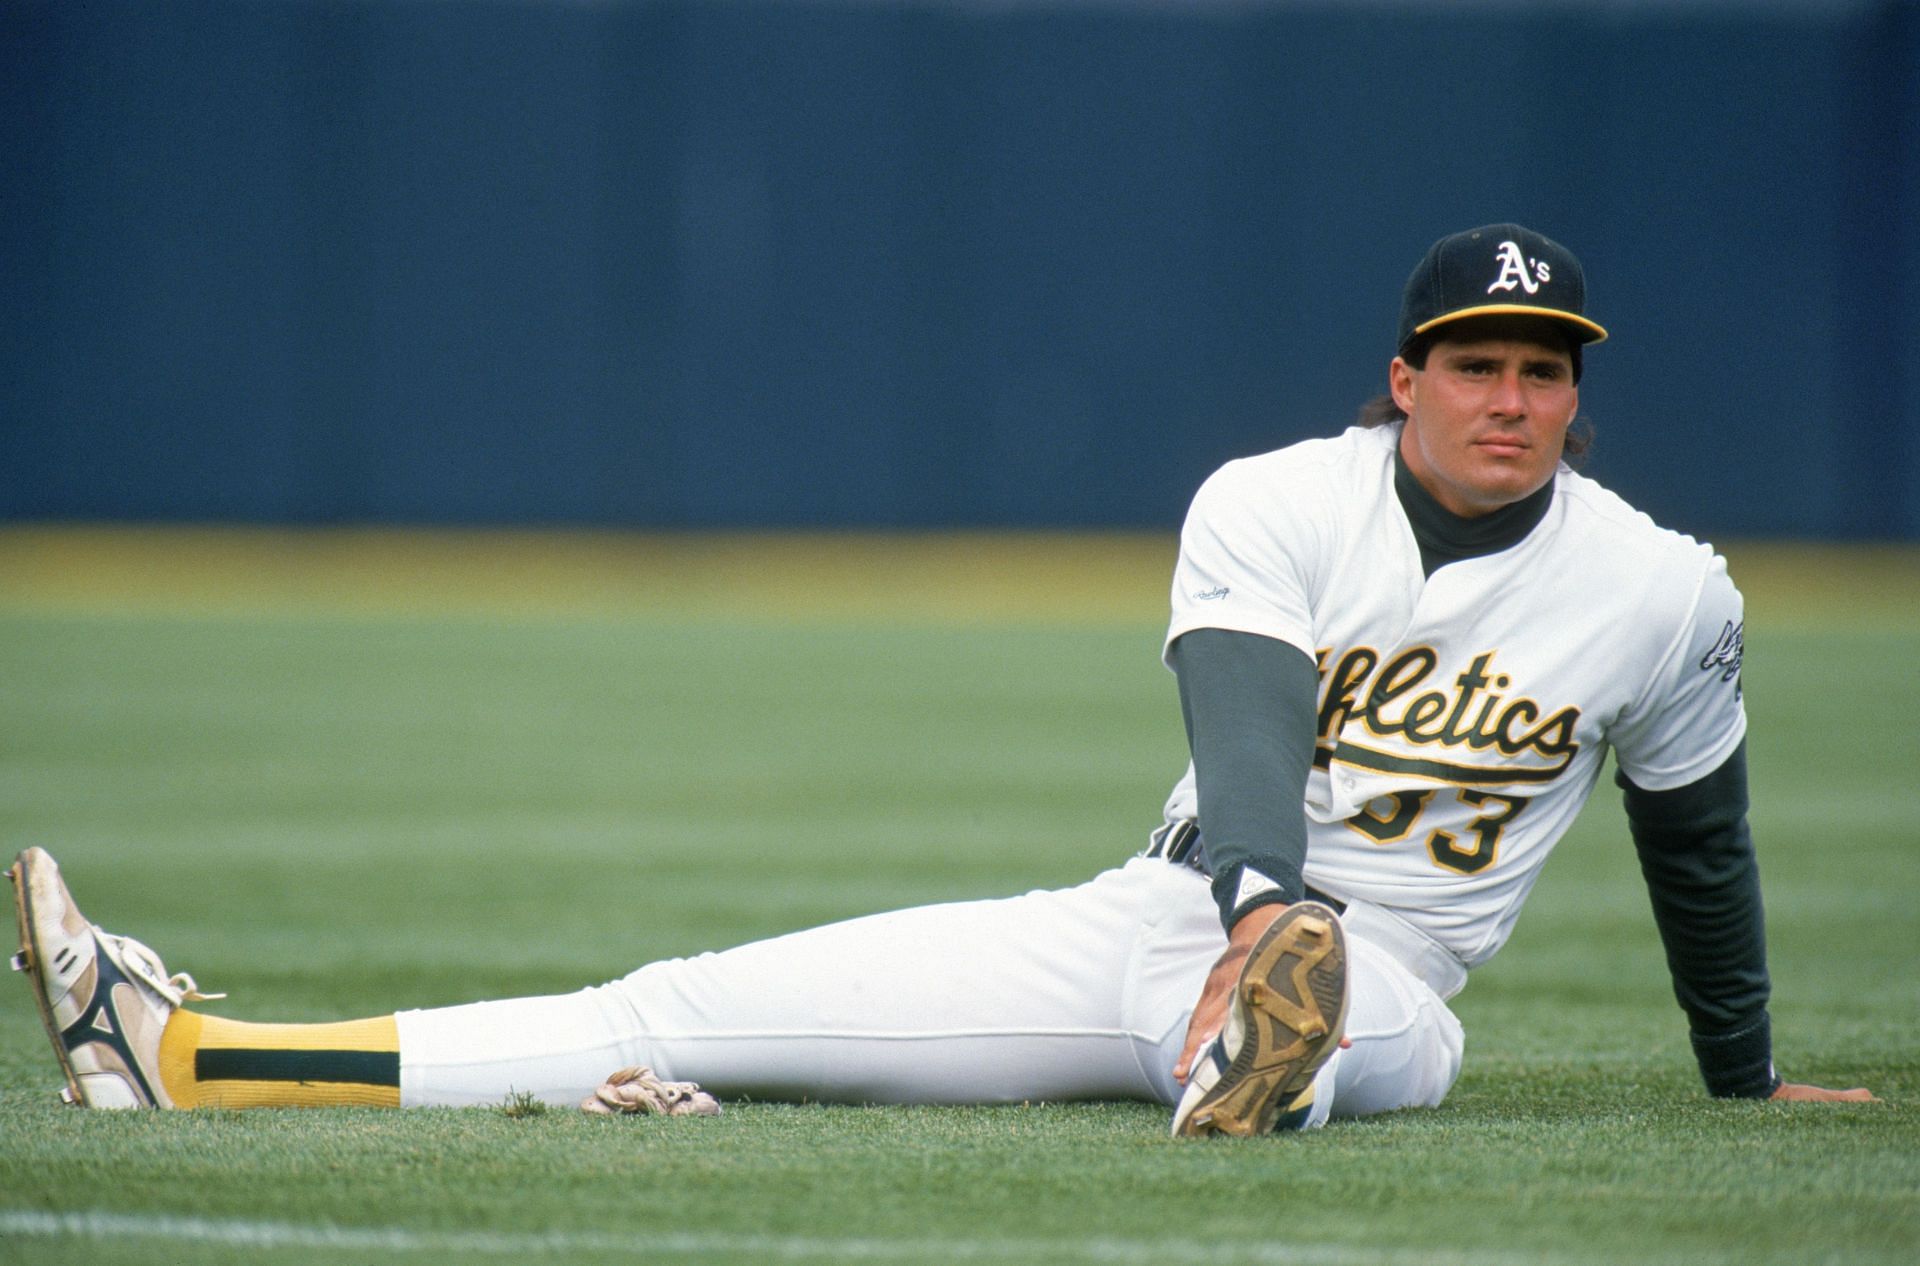 NBCSCA parts ways with Jose Canseco after A's condemn his tweets